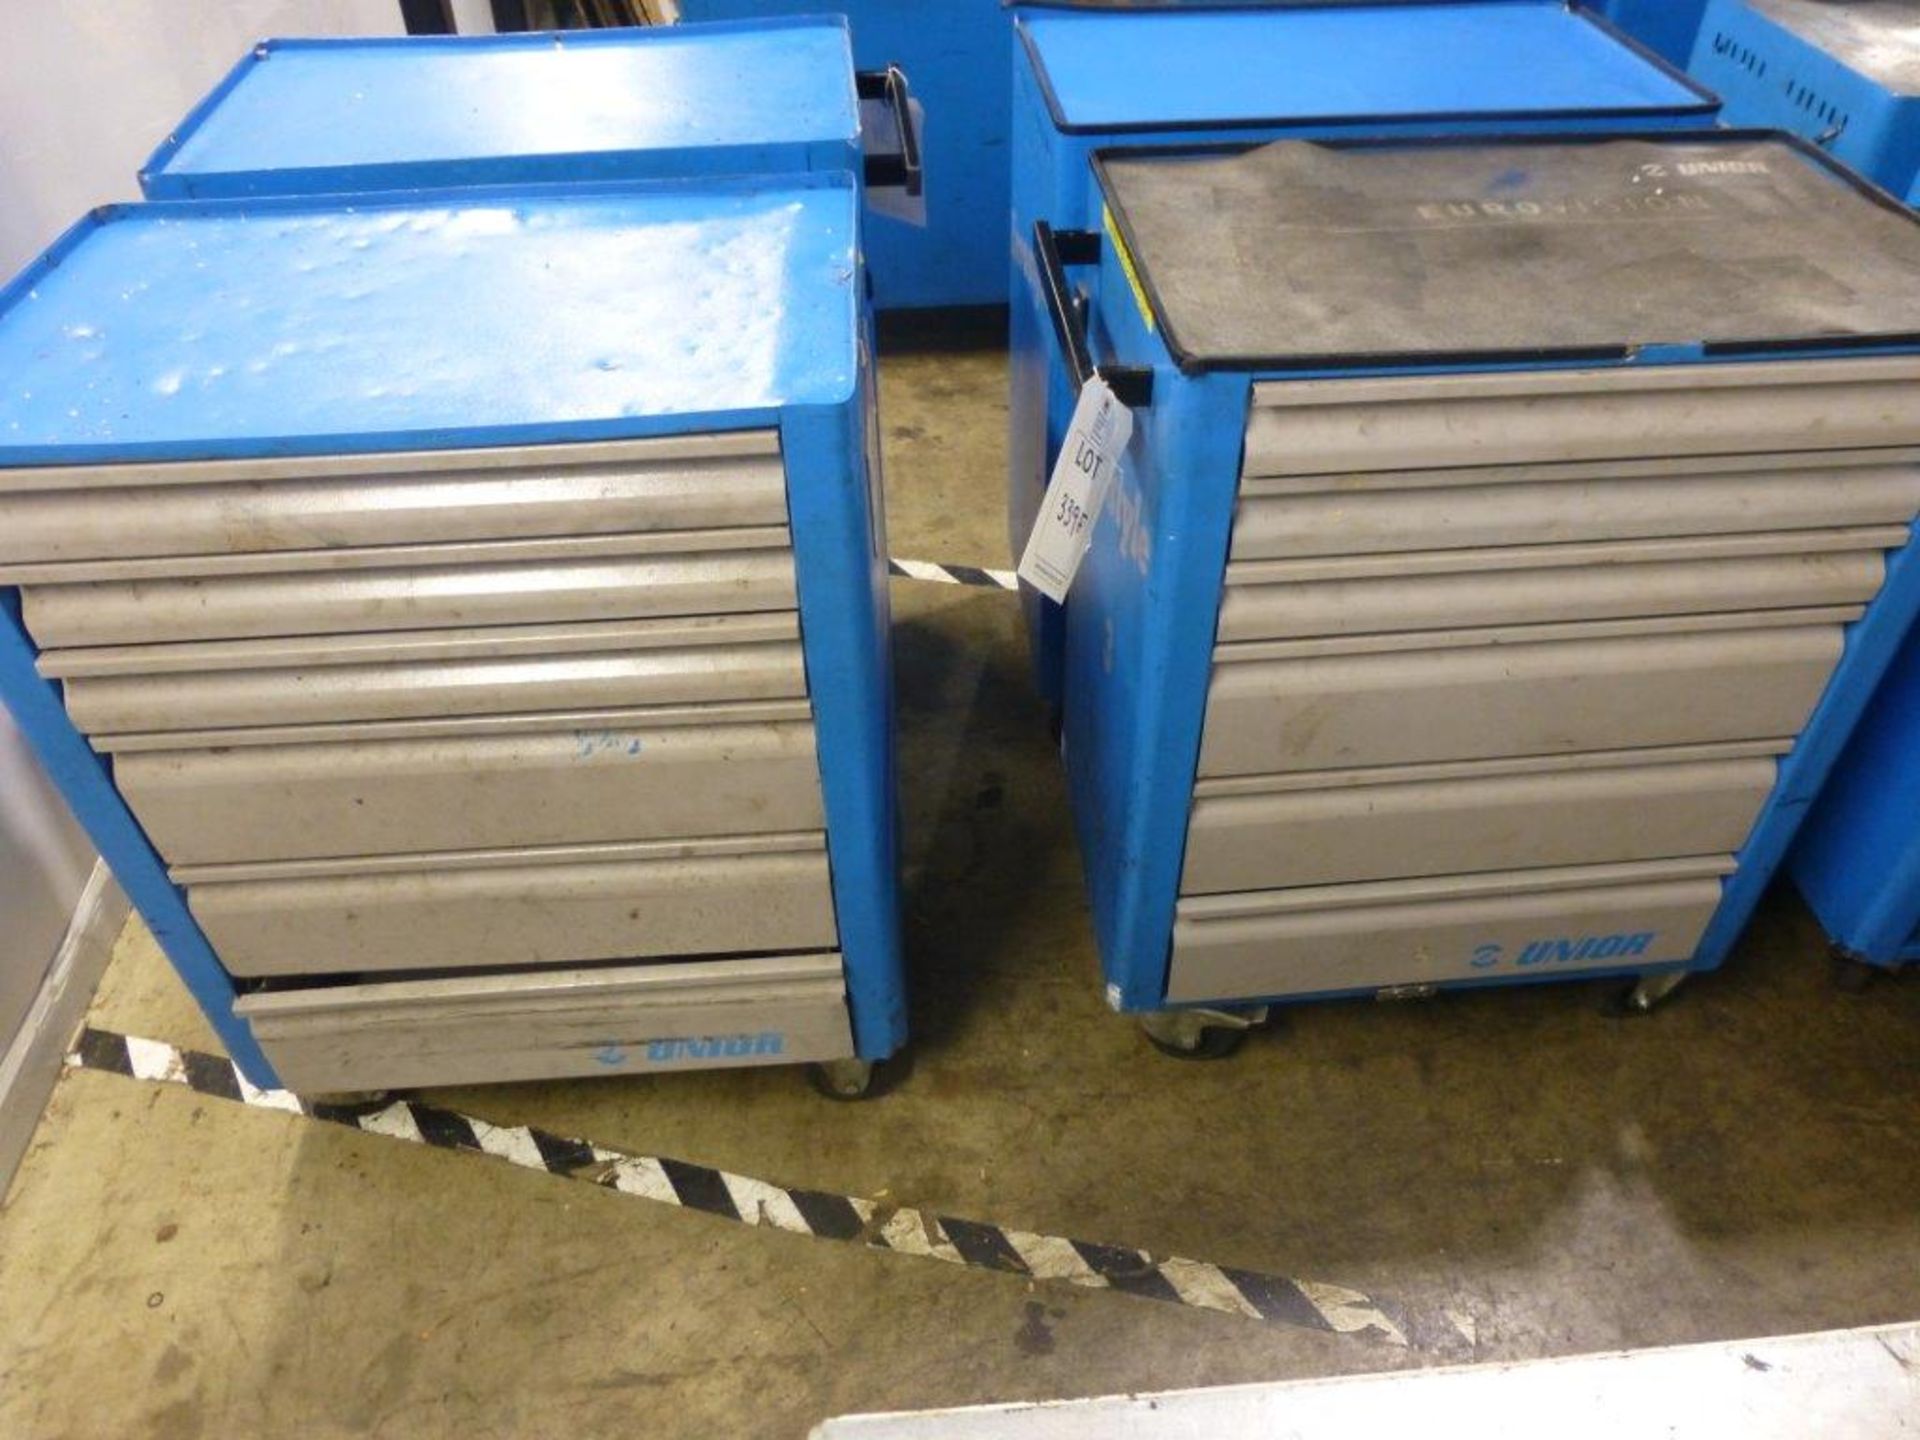 2 Unior Eurostyle 6 drawer tool cabinets (no contents)